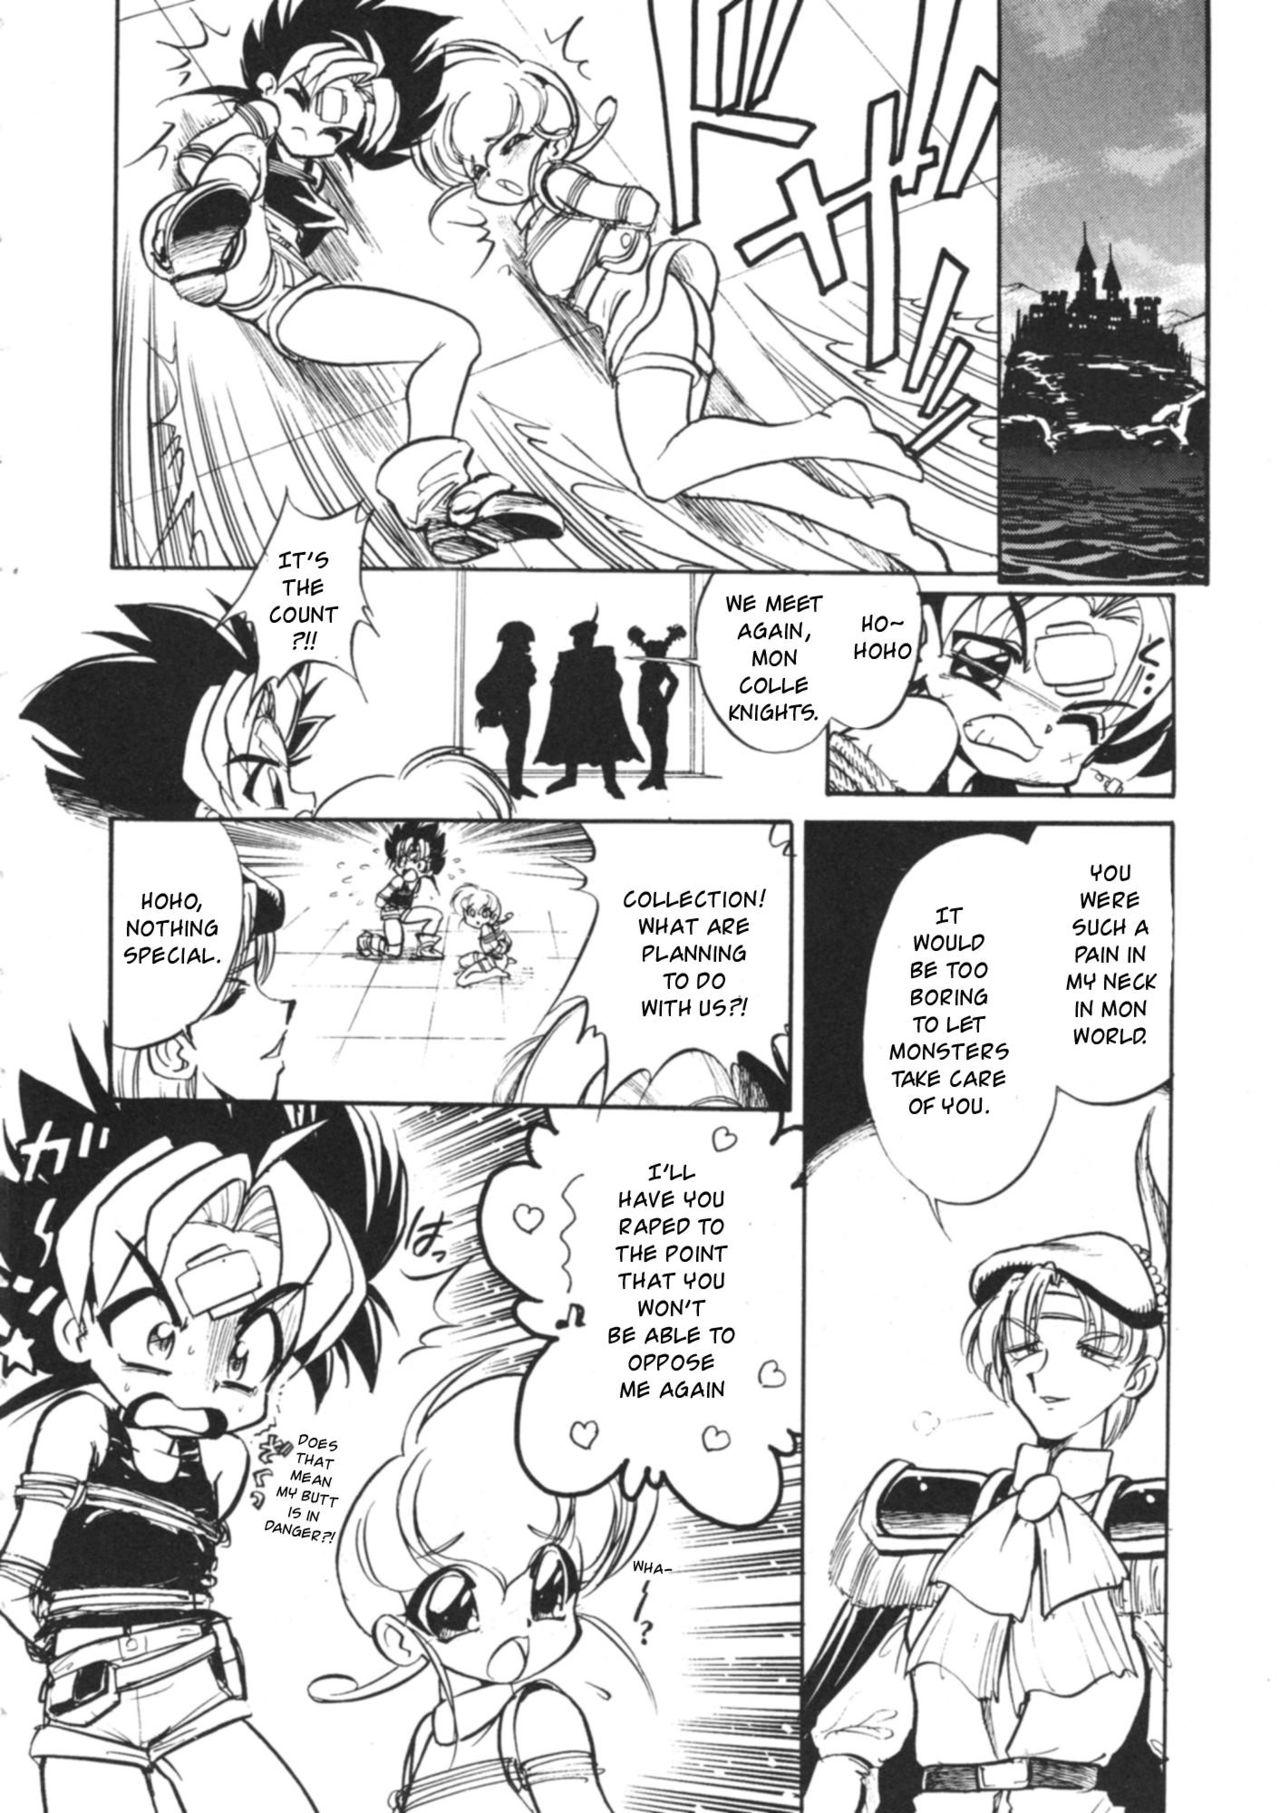 Caliente Kekkou na Otemae - Mon colle knights Piss - Page 5